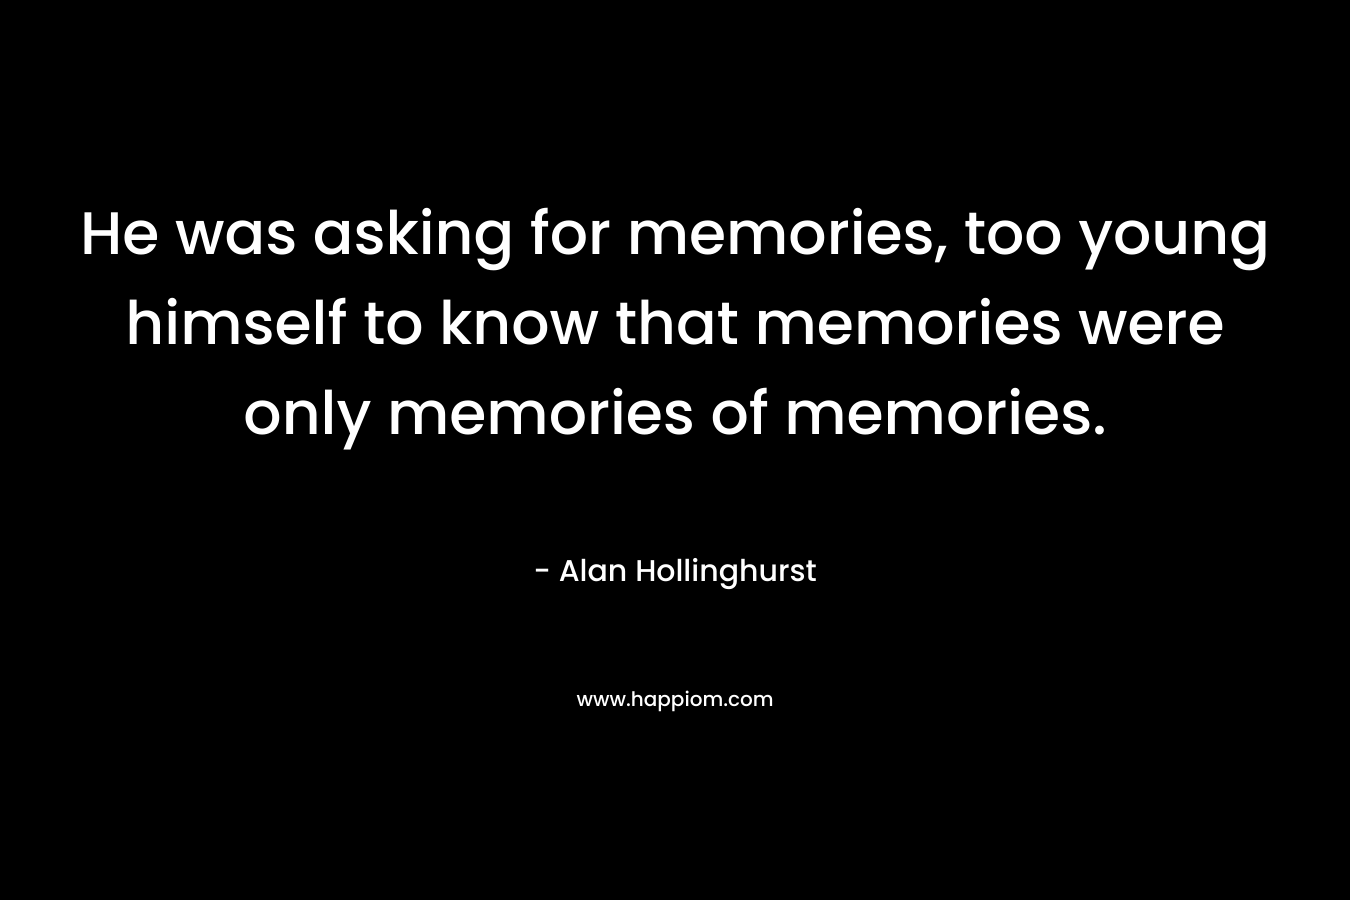 He was asking for memories, too young himself to know that memories were only memories of memories.